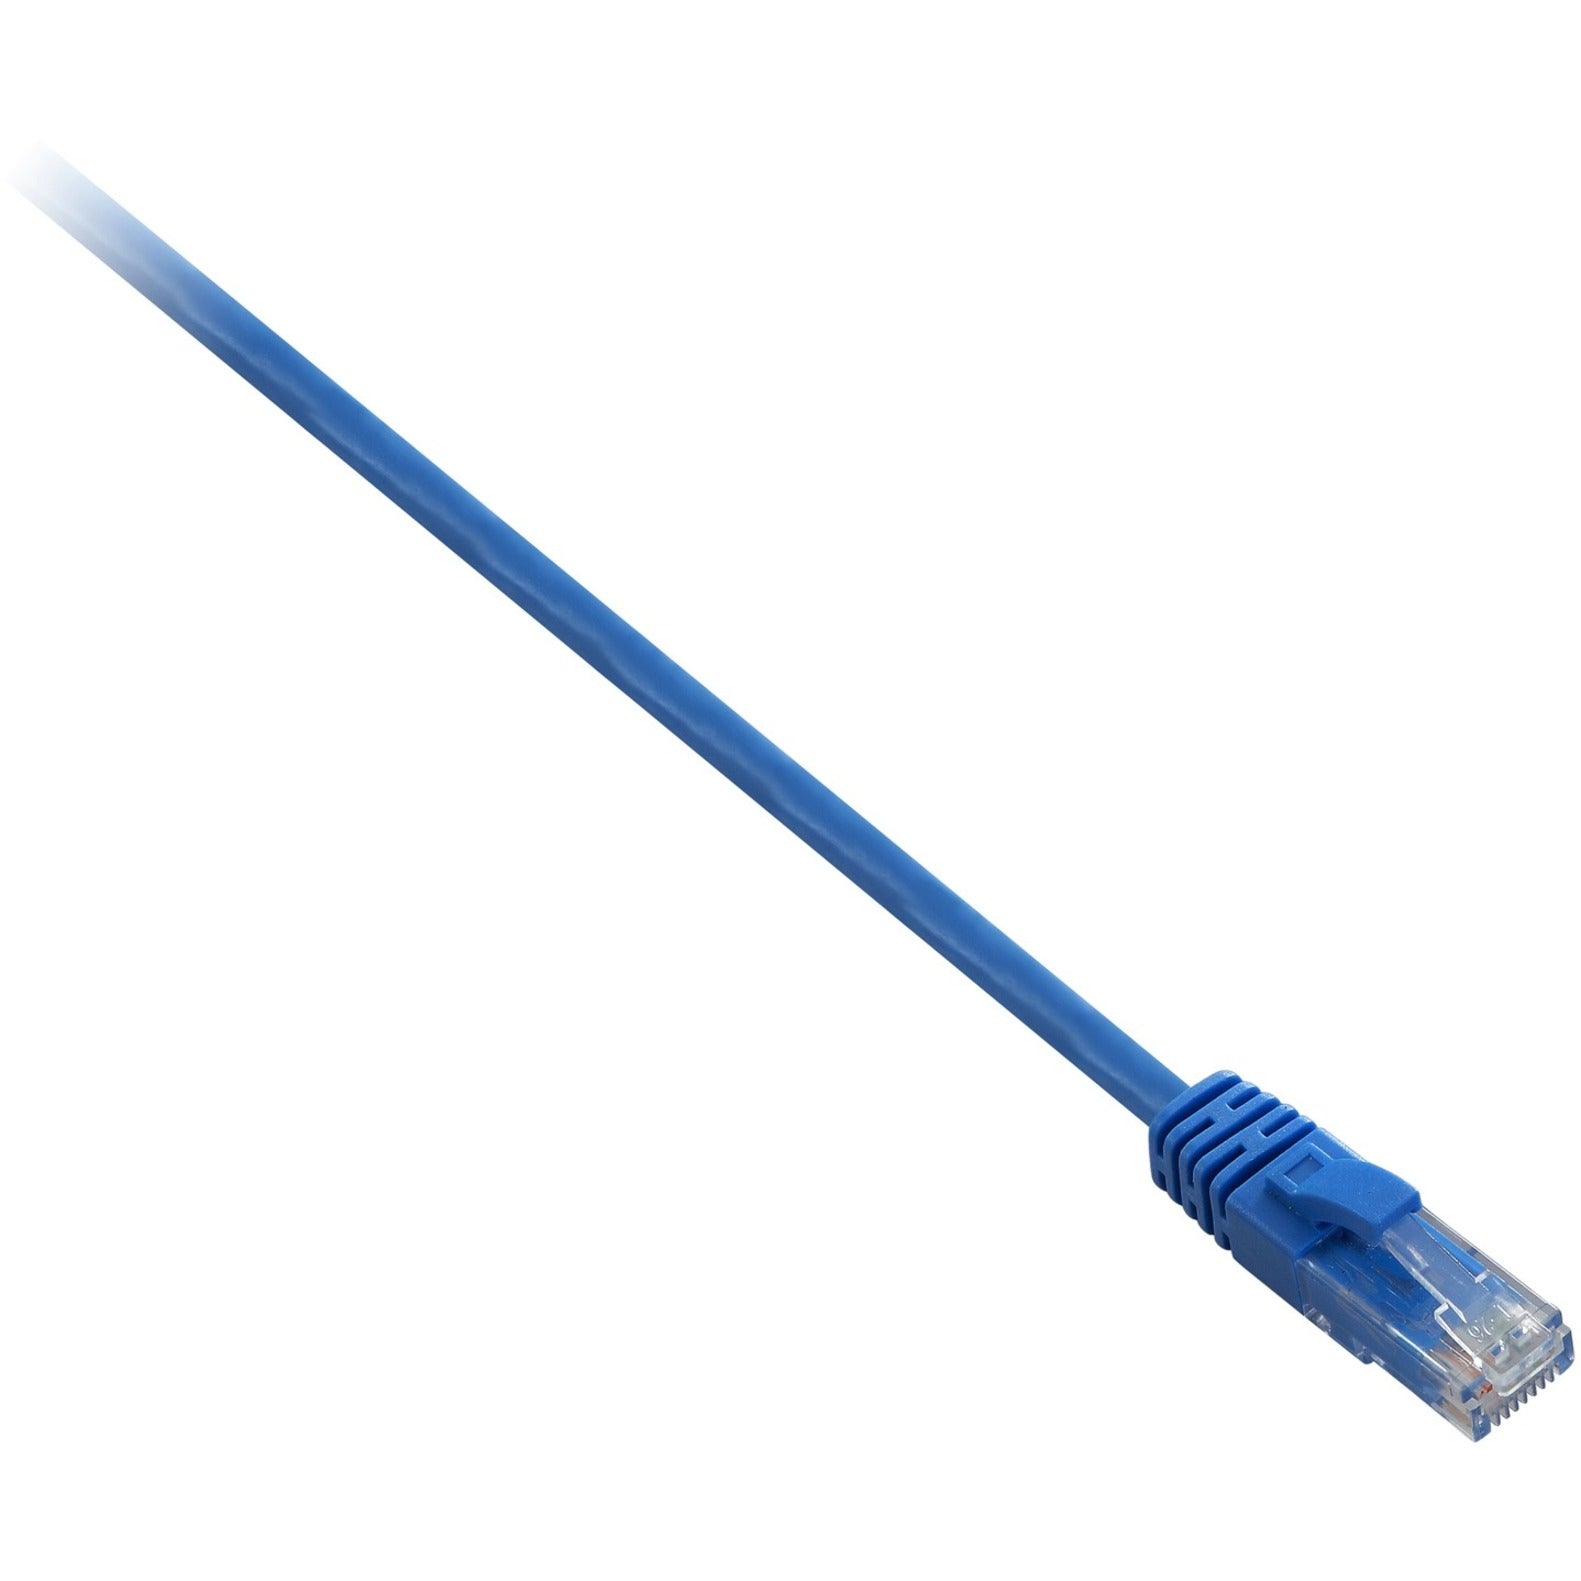 V7 V7N2C6-07F-BLUS Blue Cat6 Unshielded (UTP) Cable RJ45 Male to RJ45 Male 2m 6.6ft, Molded, Crosstalk Protection, Noise Reducing, Strain Relief, Snagless, Locking Latch, EMI/RF Protection